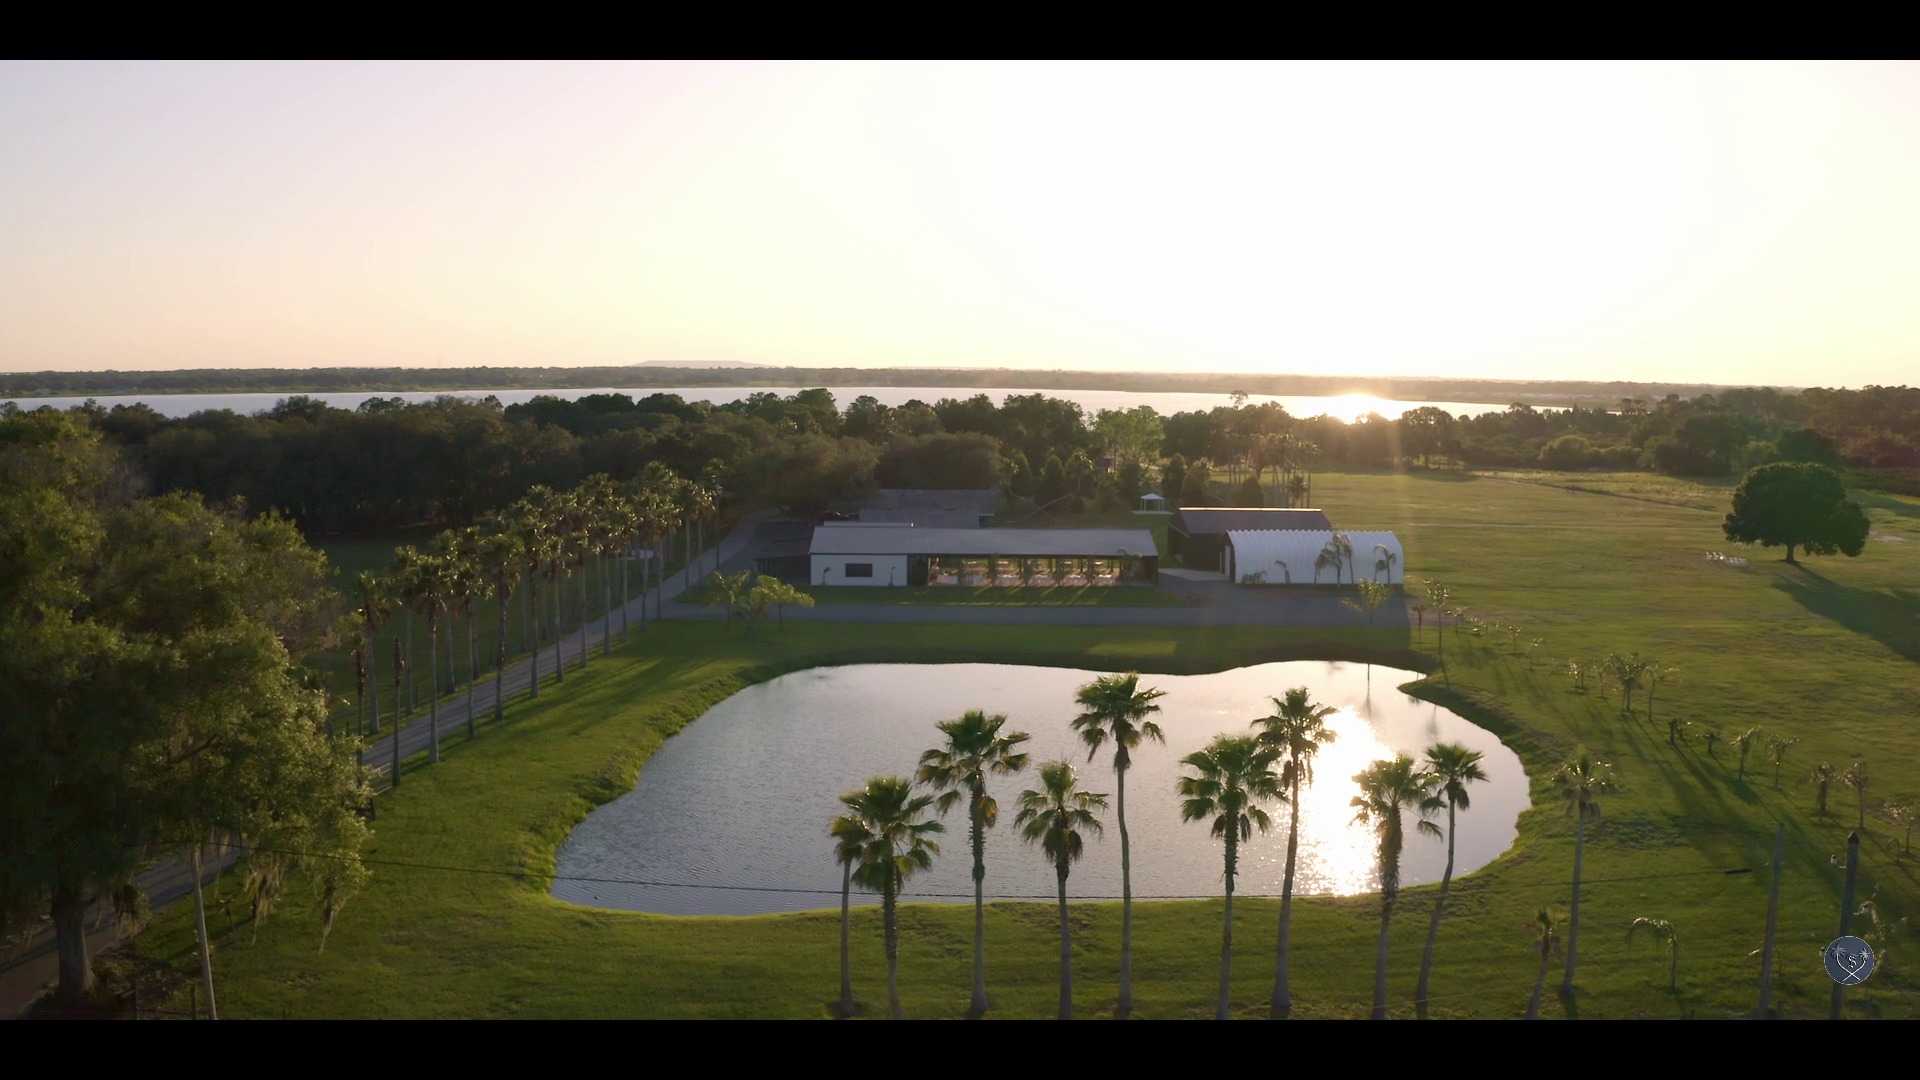 An aerial view of a house with a pond and palm trees, perfect for a Florida Wedding Venue.